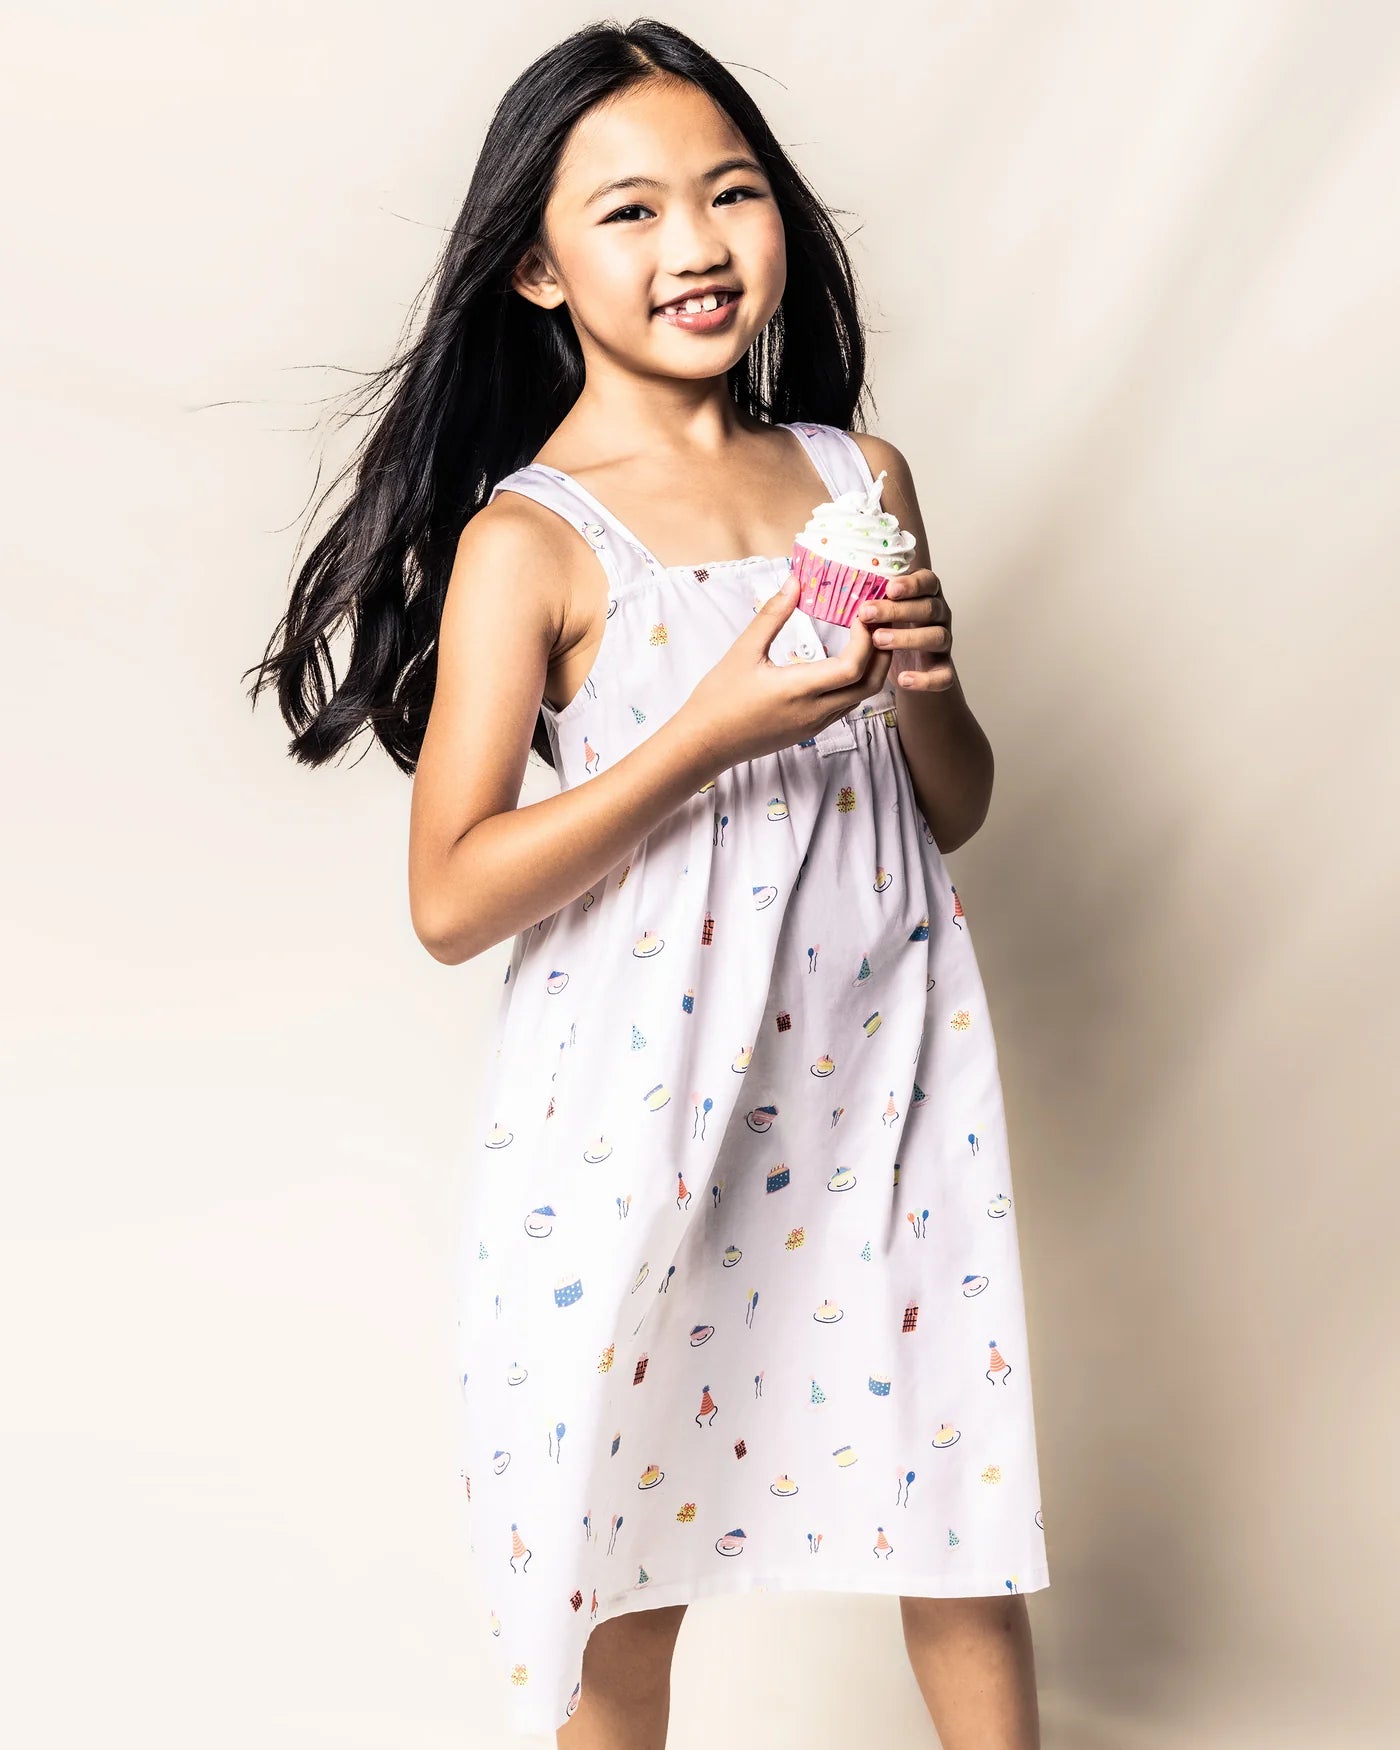 Birthday Wishes Charlotte Nightgown (2T)